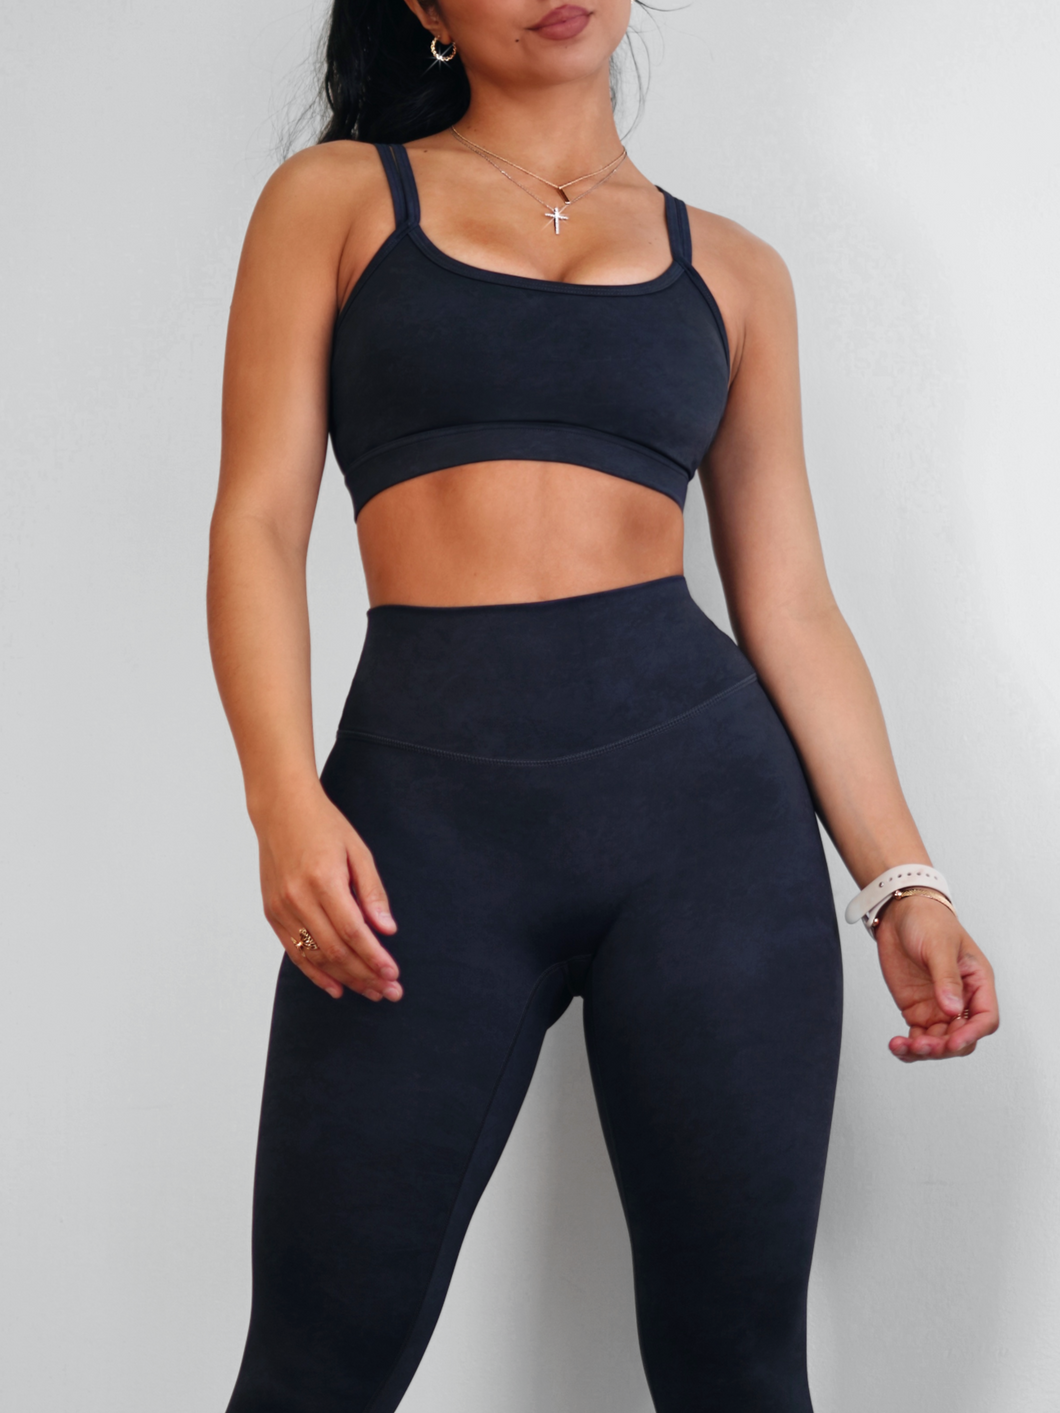 Fitted HIIT Sports Bra V1 (Charcoal)